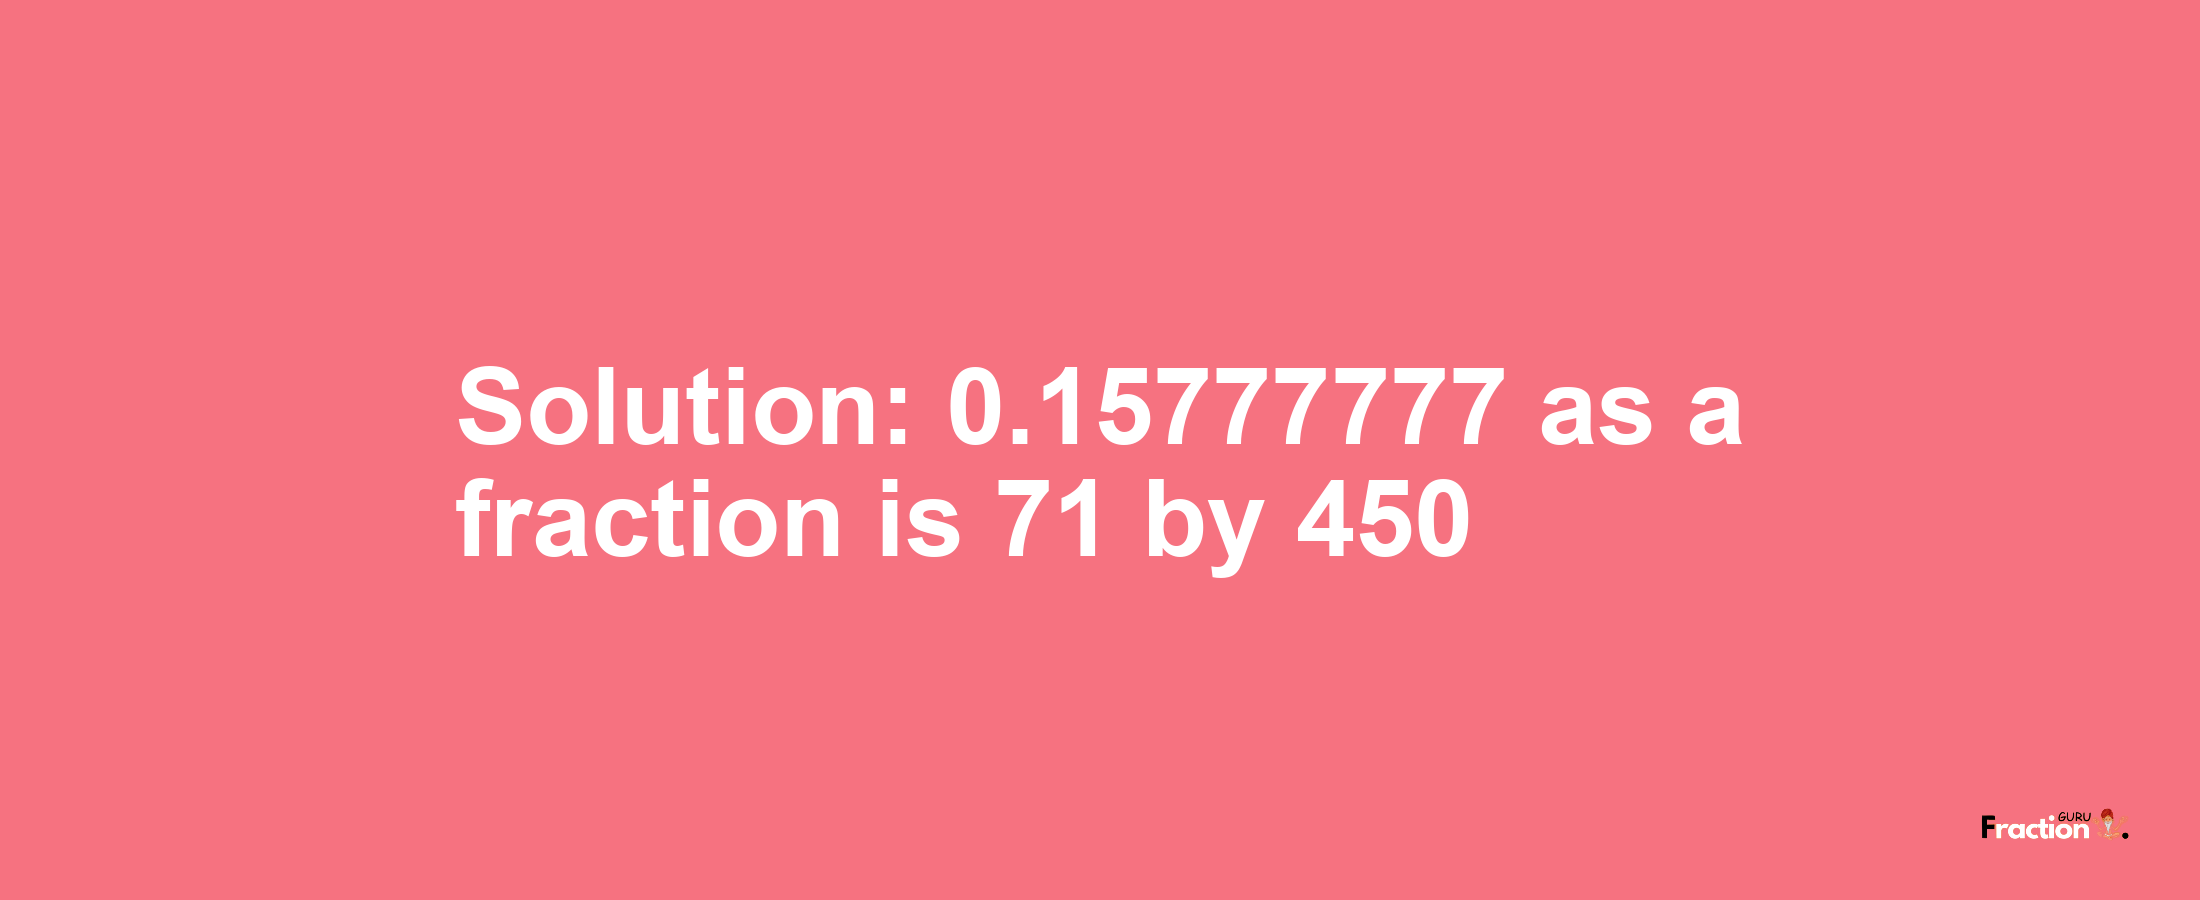 Solution:0.15777777 as a fraction is 71/450